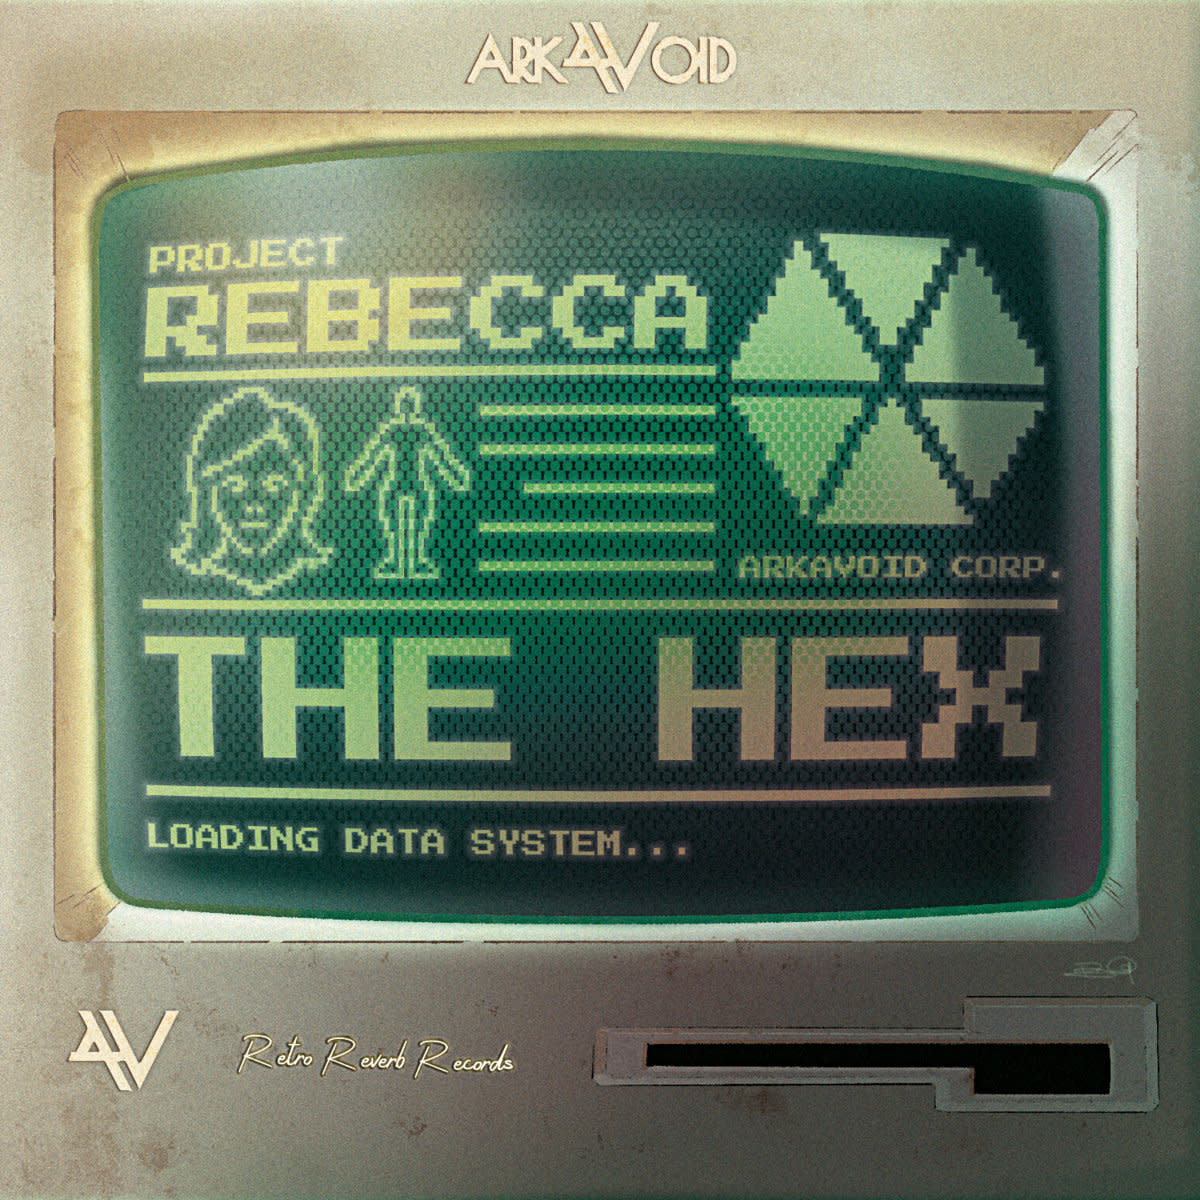 Synth Single Review: “The Hex’’ by Arkavoid